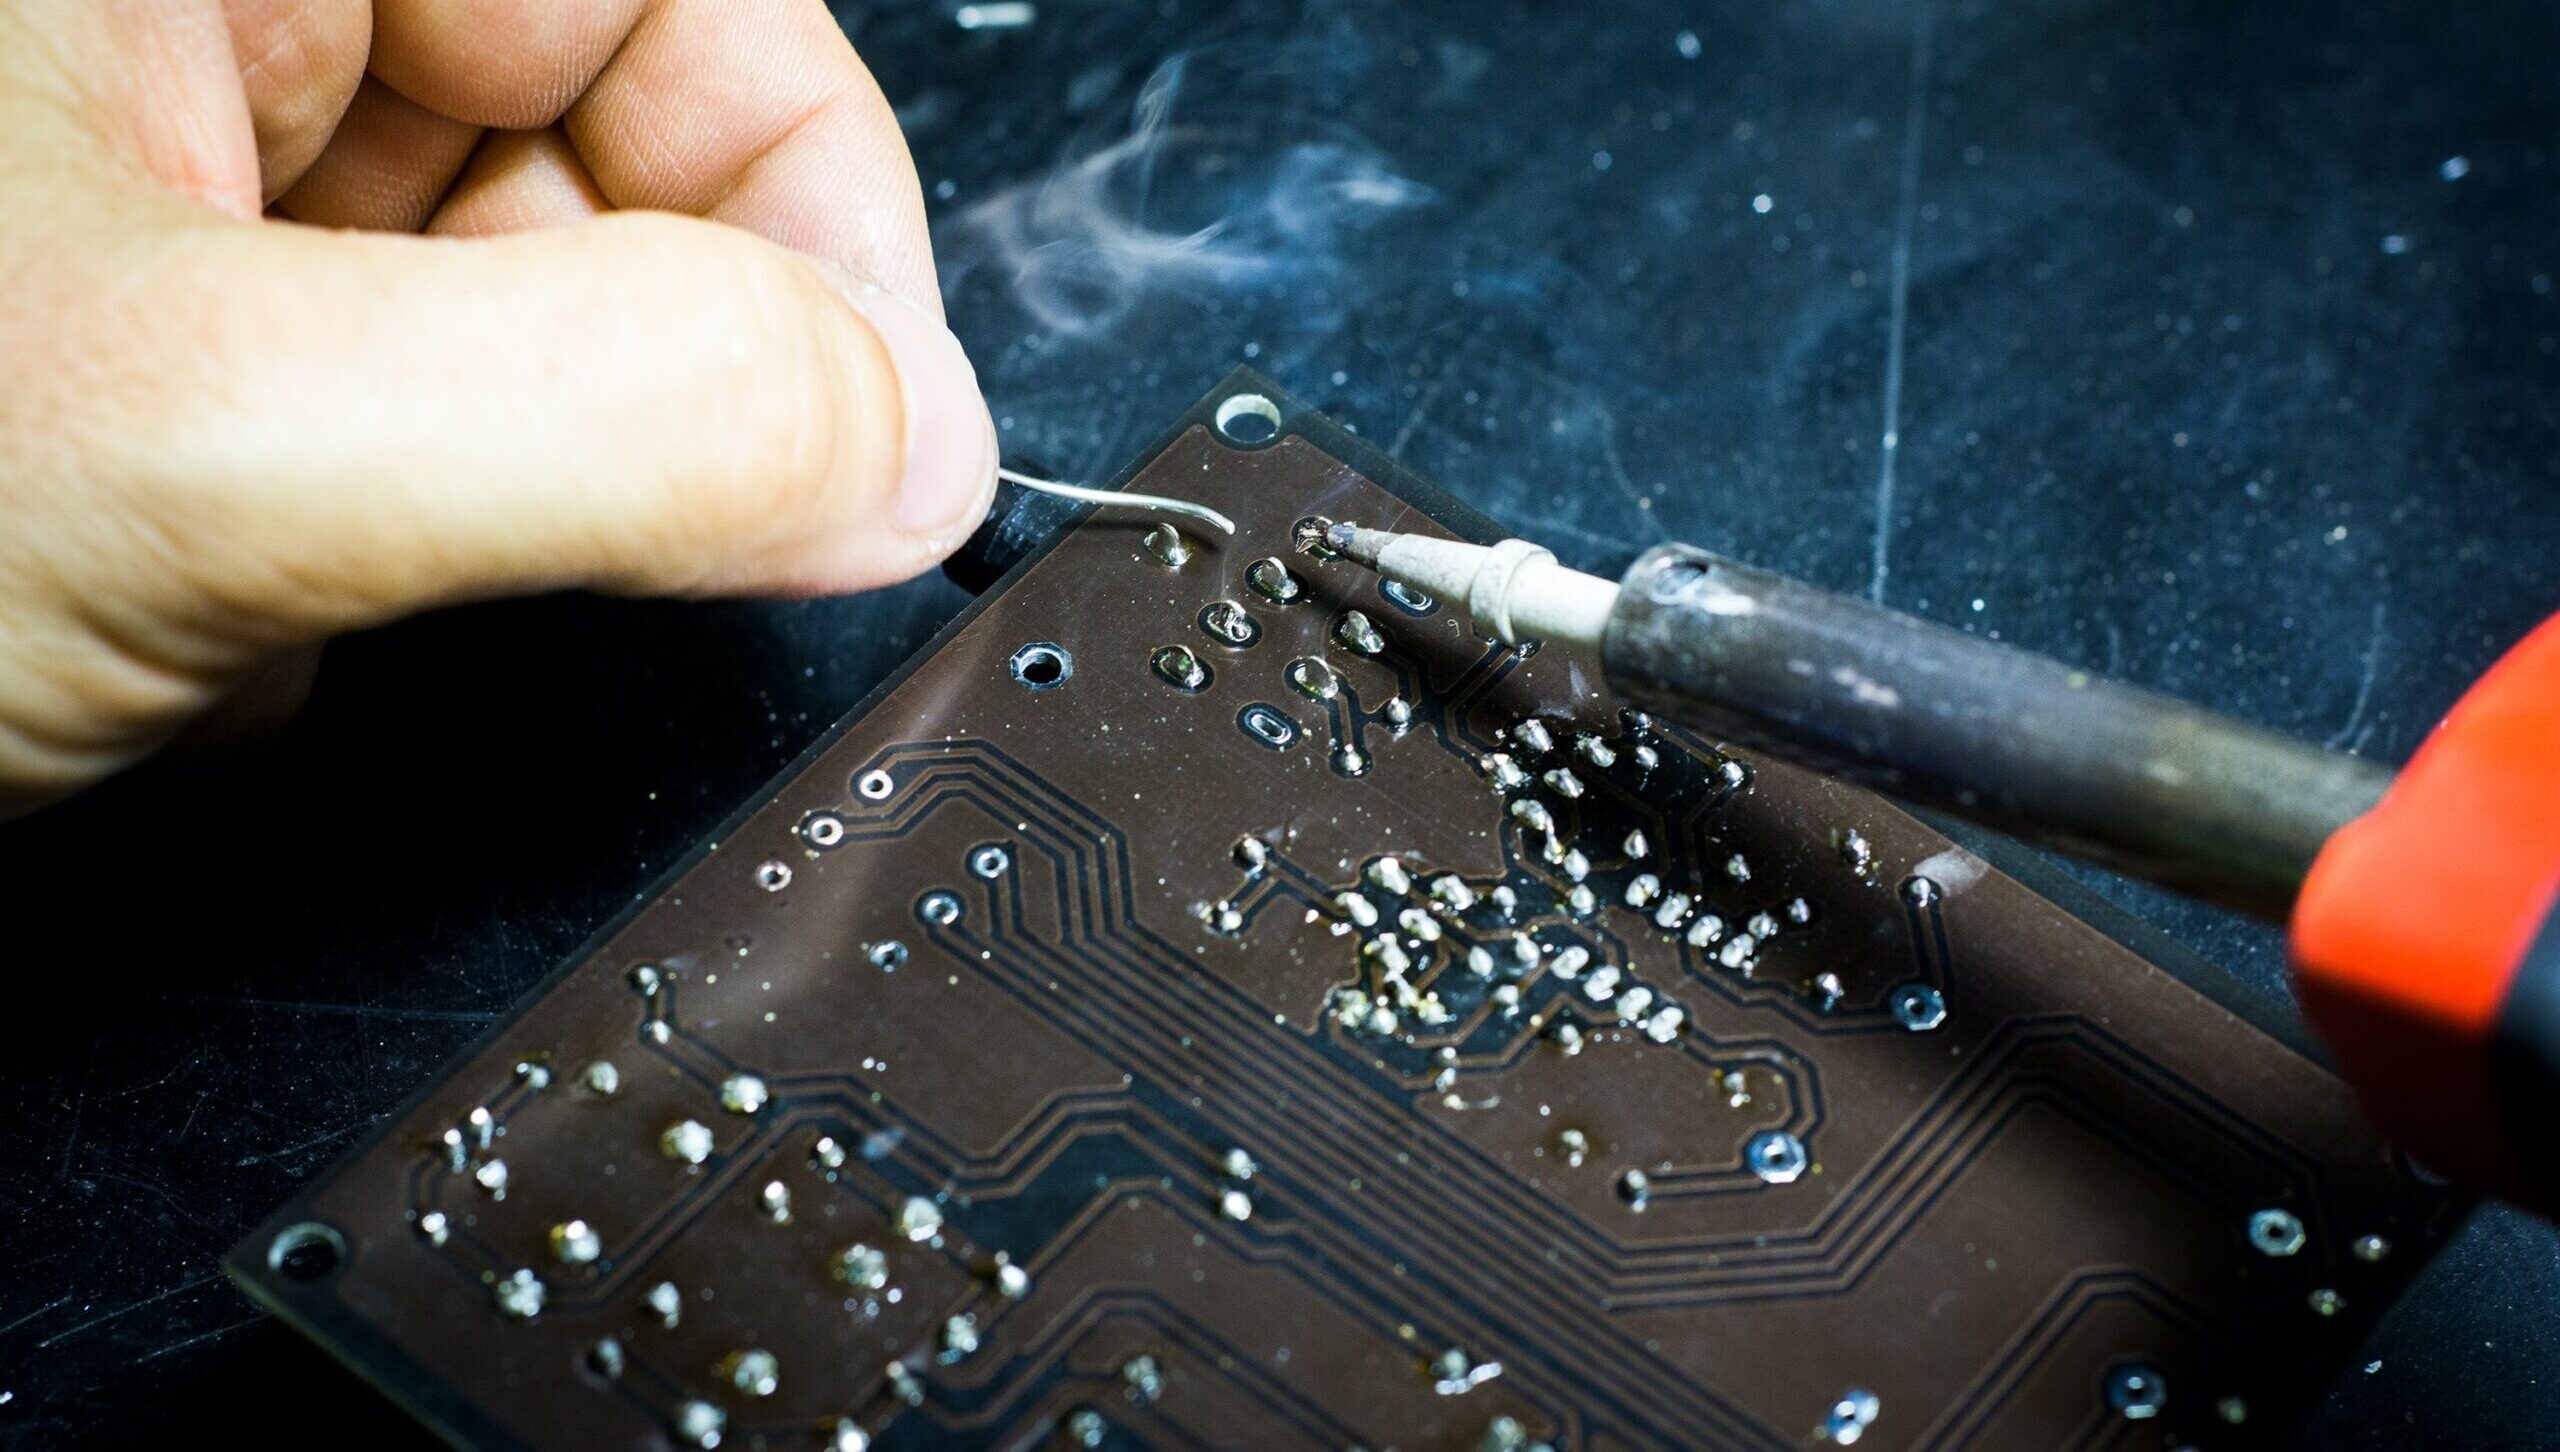 Is amateur DIY the wisest choice for your laptop